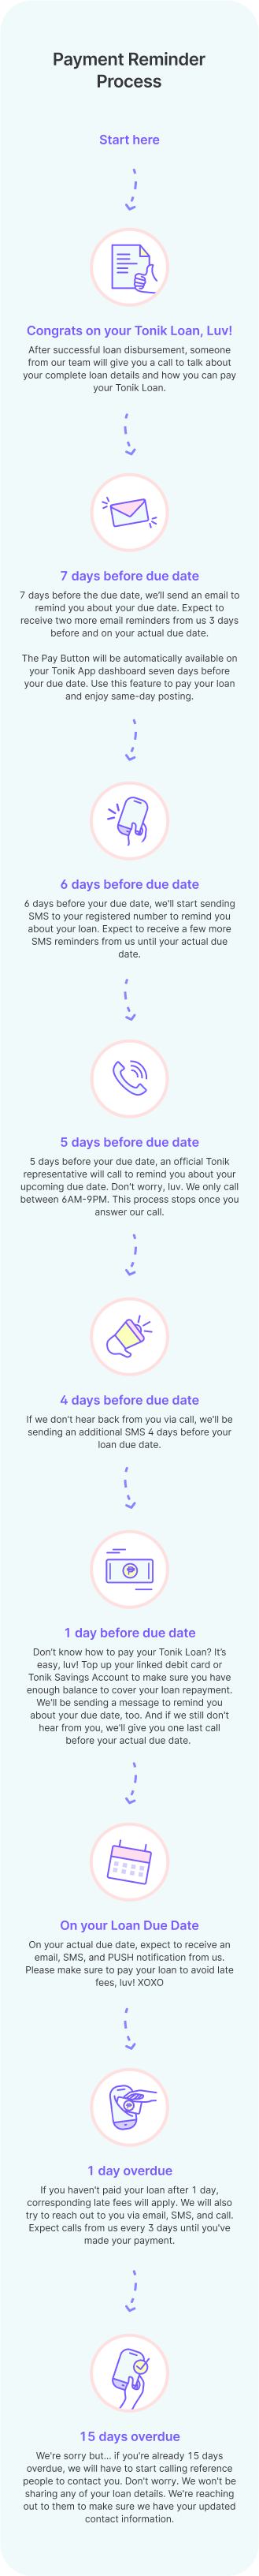 An inforgraphic that shows Tonik's payment reminder process